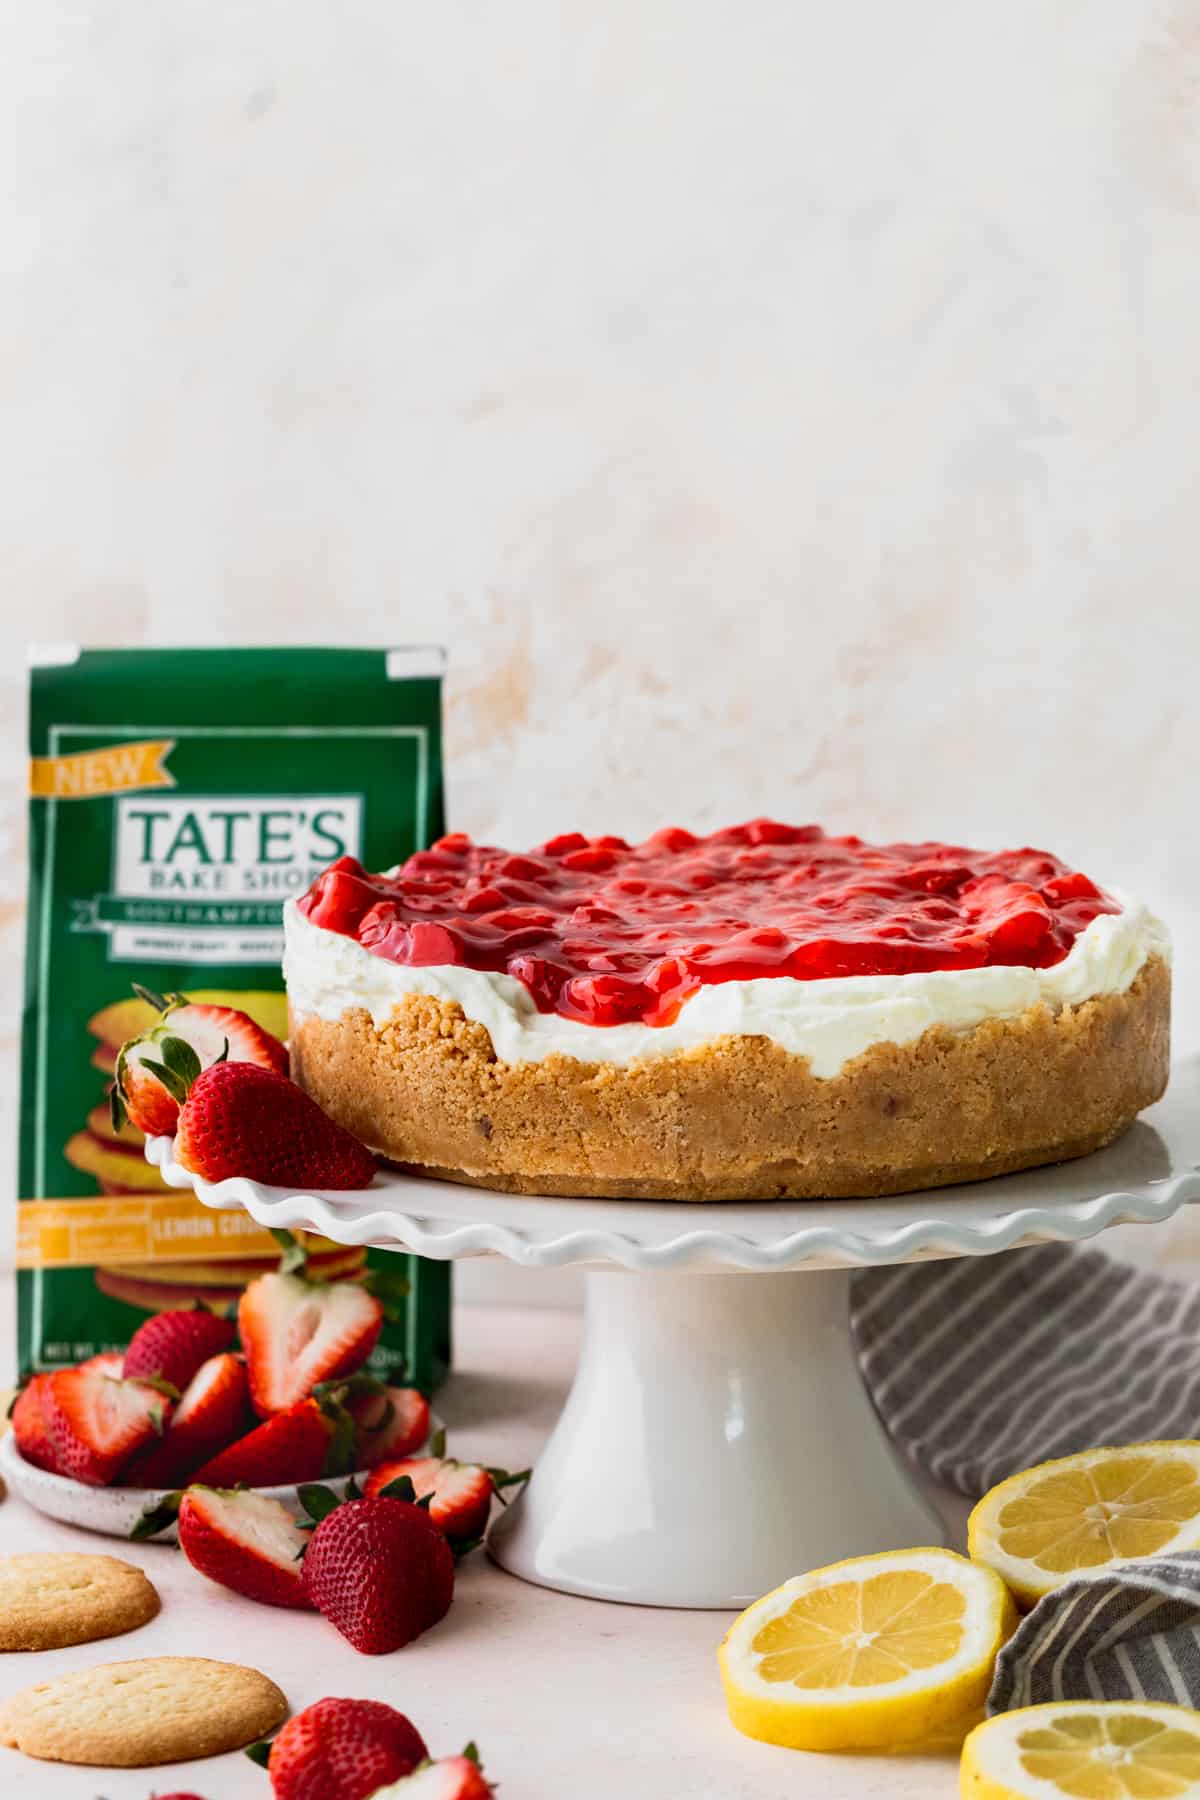 Lemon cheesecake with strawberry sauce on a cake stand.